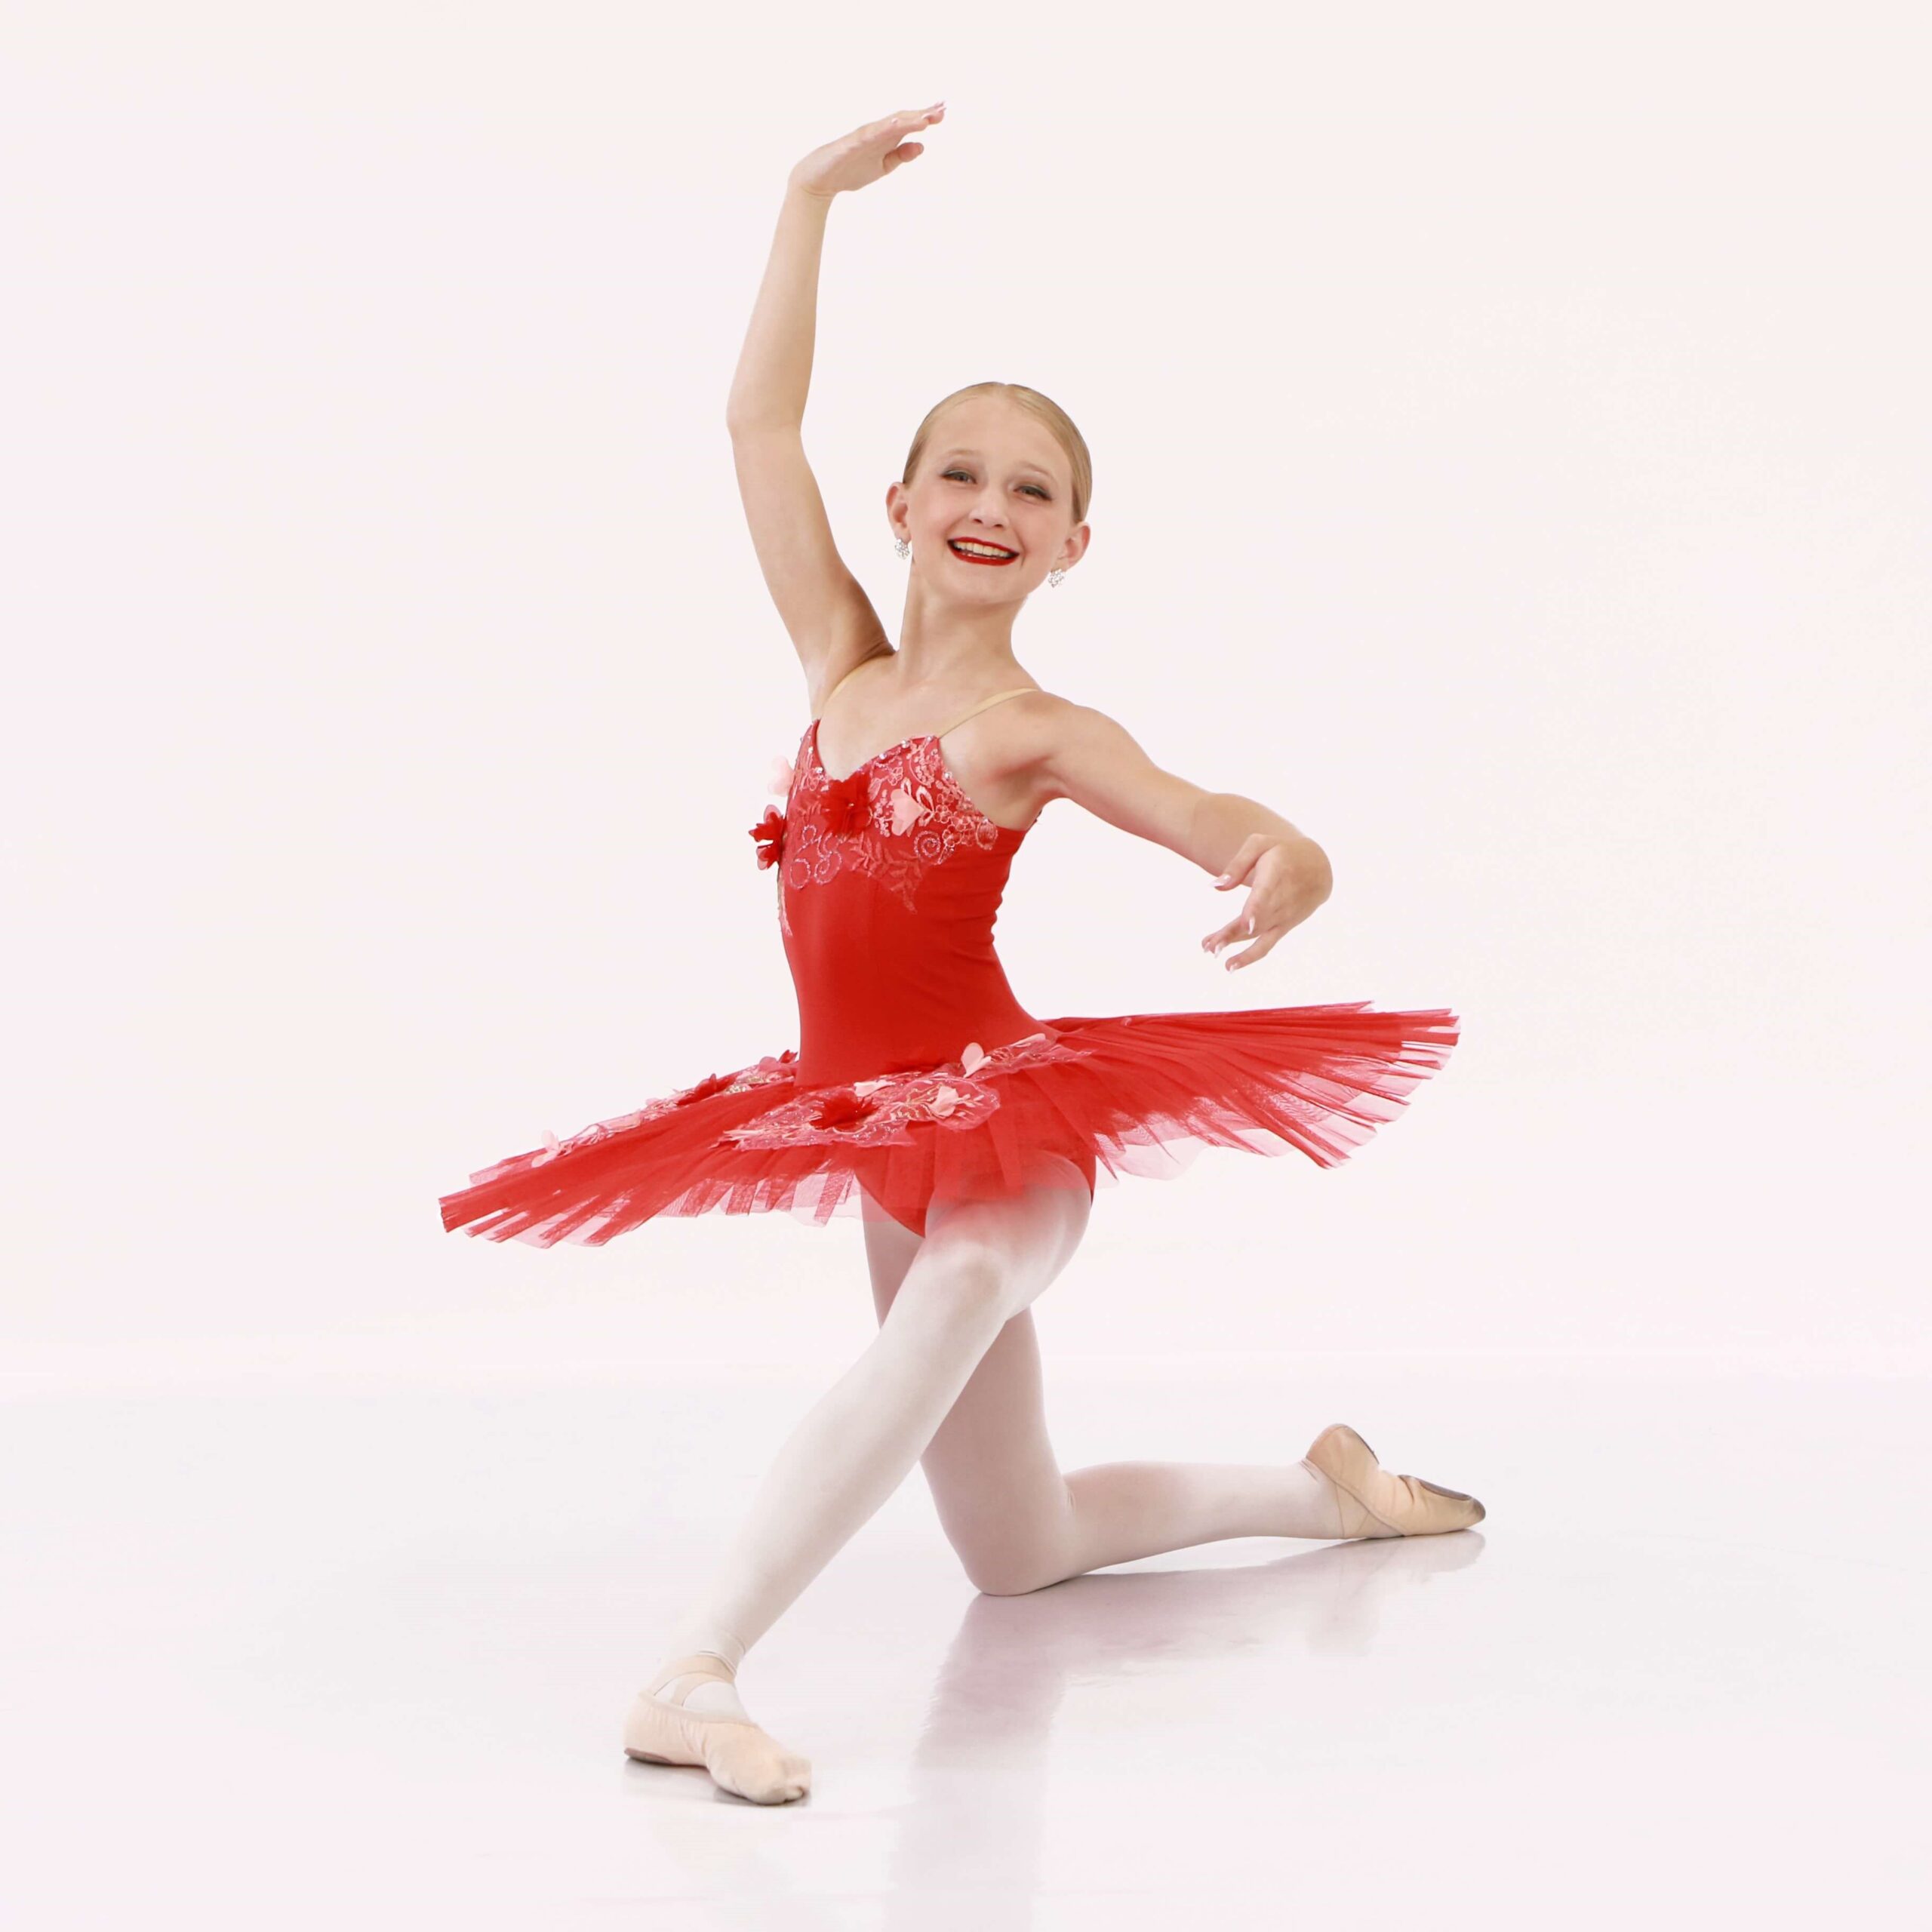 10 year old ballet class dancer from Milton wearing a red tutu in a ballet pose